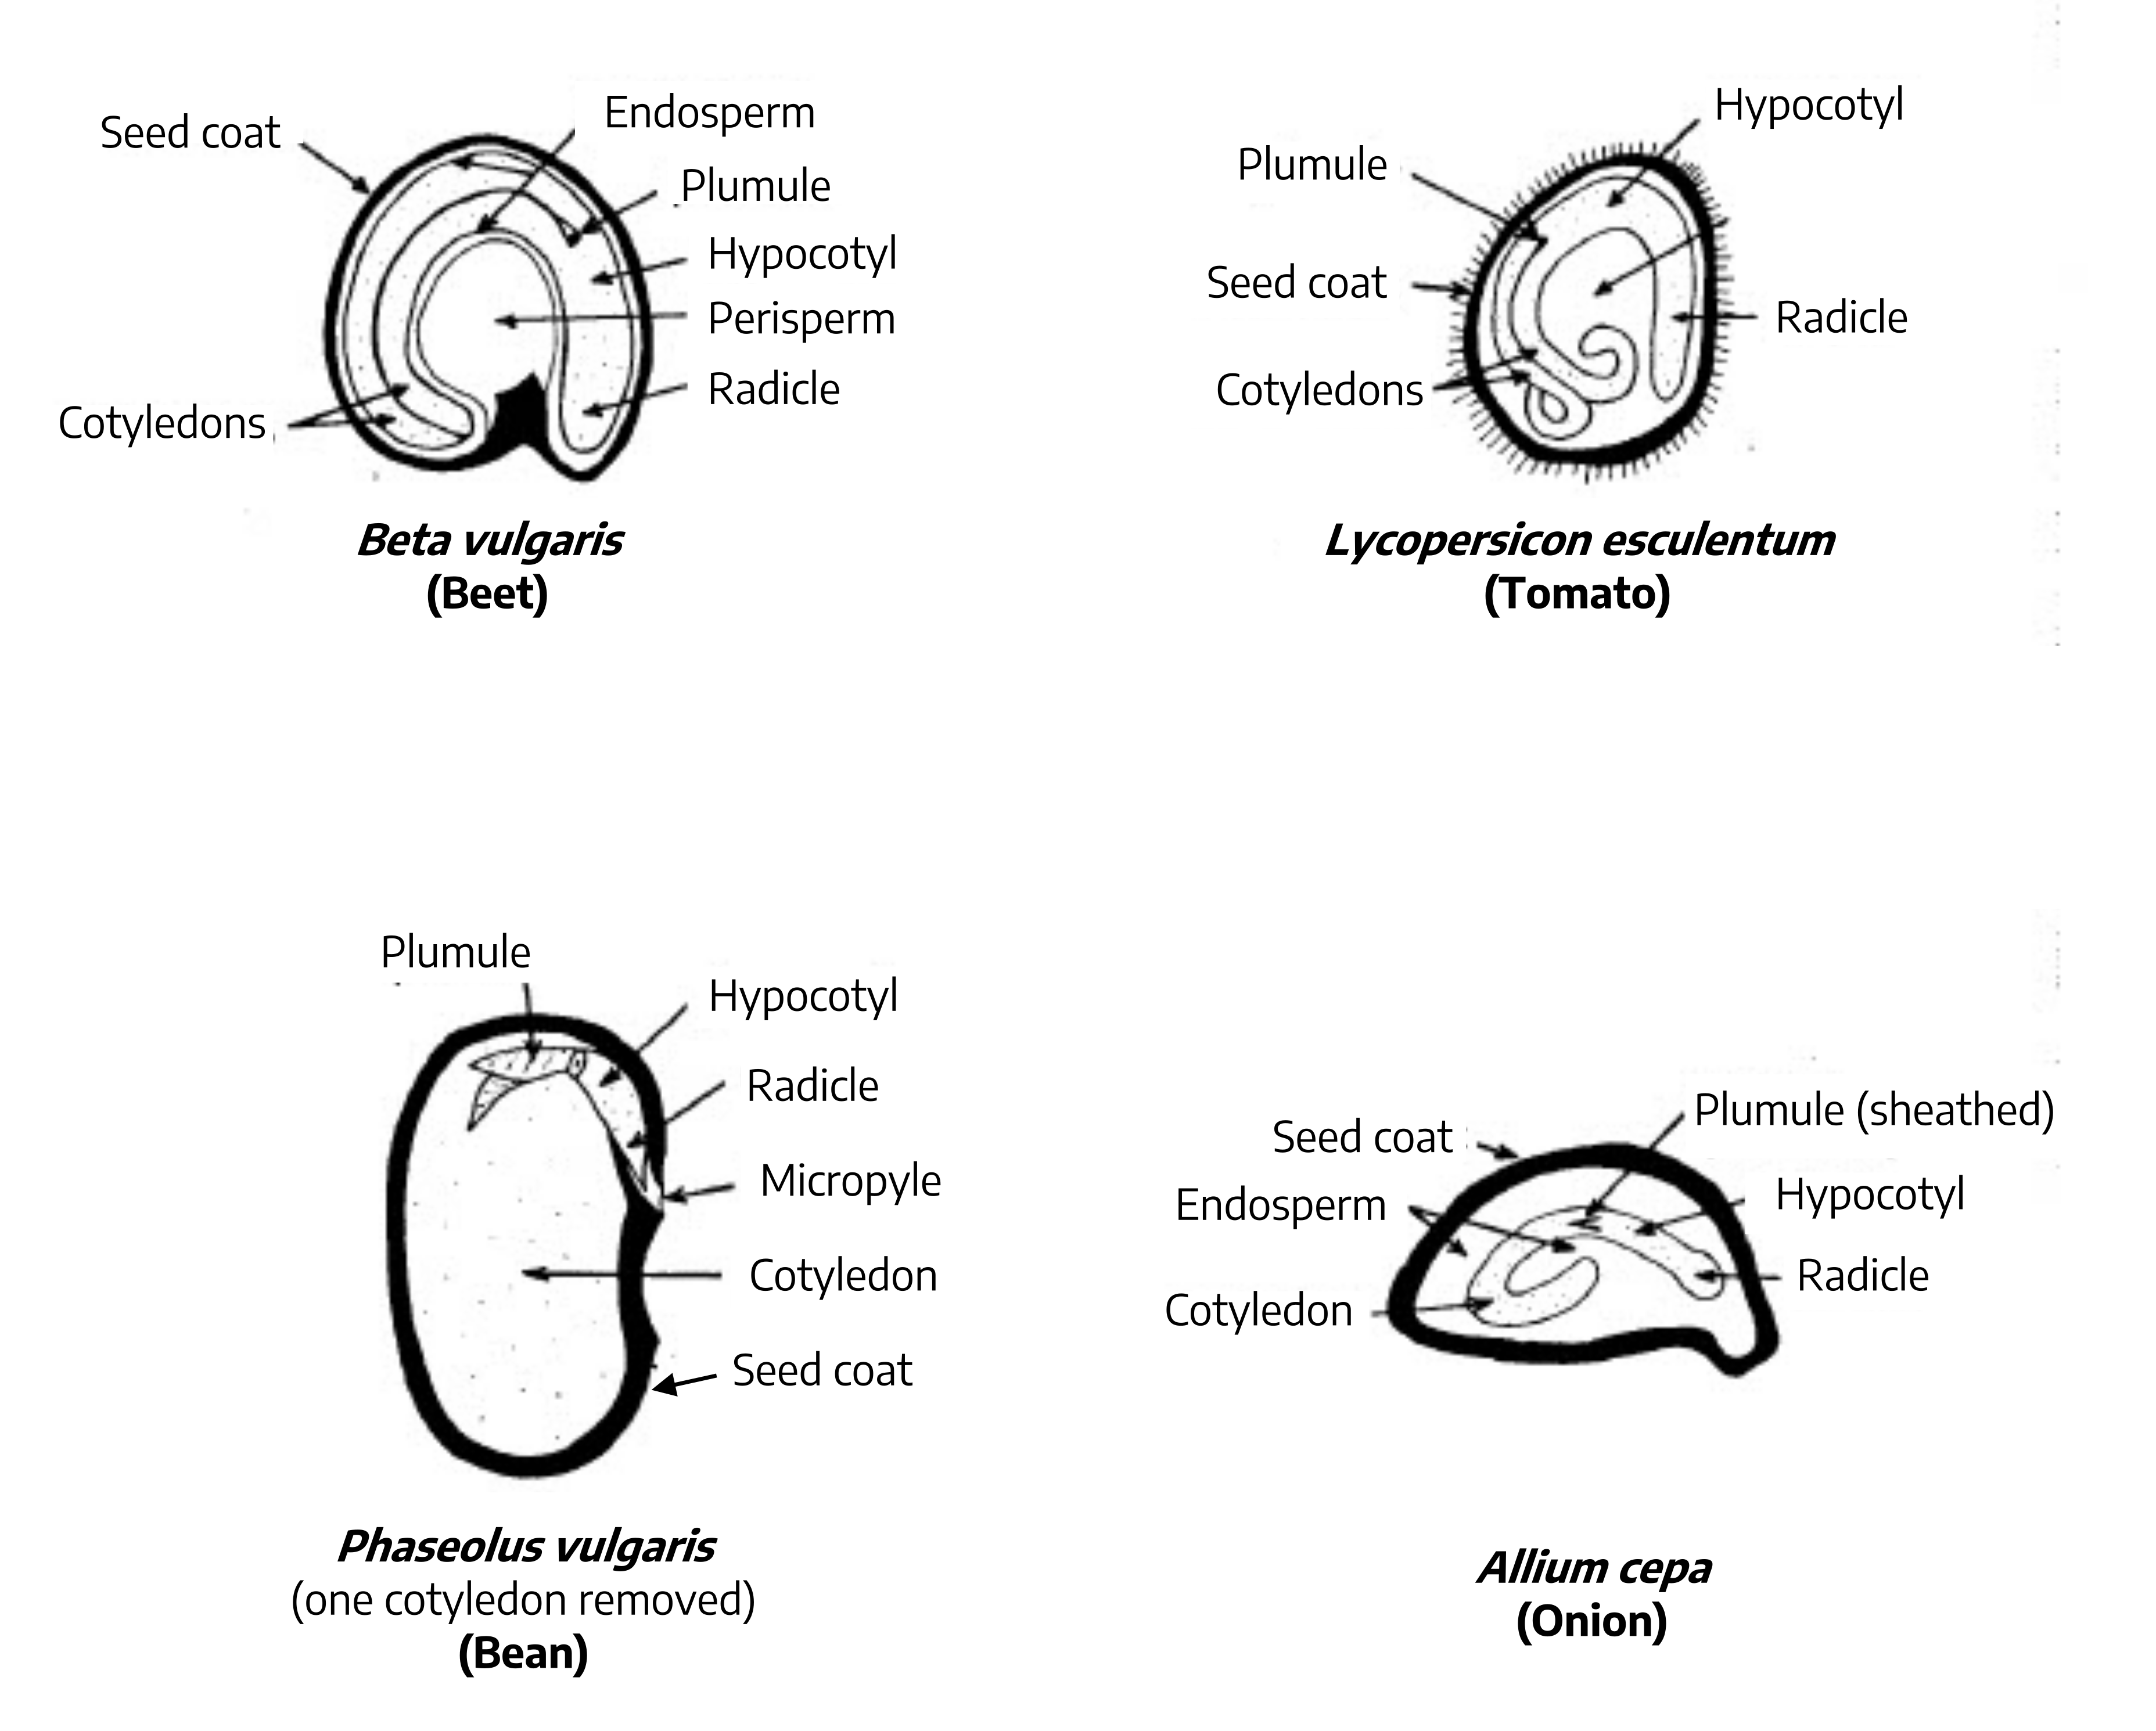 There are four diagrams showing the different parts of a seed. The top left diagram is a cross section of a beet seed; the inner section is the perisperm, the next layer is the endosperm, within that layer is the cotyledons which holds the plumule and hypocotyl; the entire seed is coated in the seed coat. The top right diagram is a cross section of a tomato seed; the entire seed contains cotyledons, a plumule, the radicle, and the hypocotyl, all encased by the seed coat. The bottom left diagram is a cross section of a bean seed; the entire seed is "empty" housing the cotyledon, with the small growth inside containing the micropyle, radicle, hypocotyl, and the plumule, all coated in the seed coat. The bottom right diagram is a cross section of an onion; it contains the endosperm within the inside of the seed, within the endosperm is the radicle, hypocotyl, plumule (sheathed), and the cotyledon, all of this is within the seed coat.